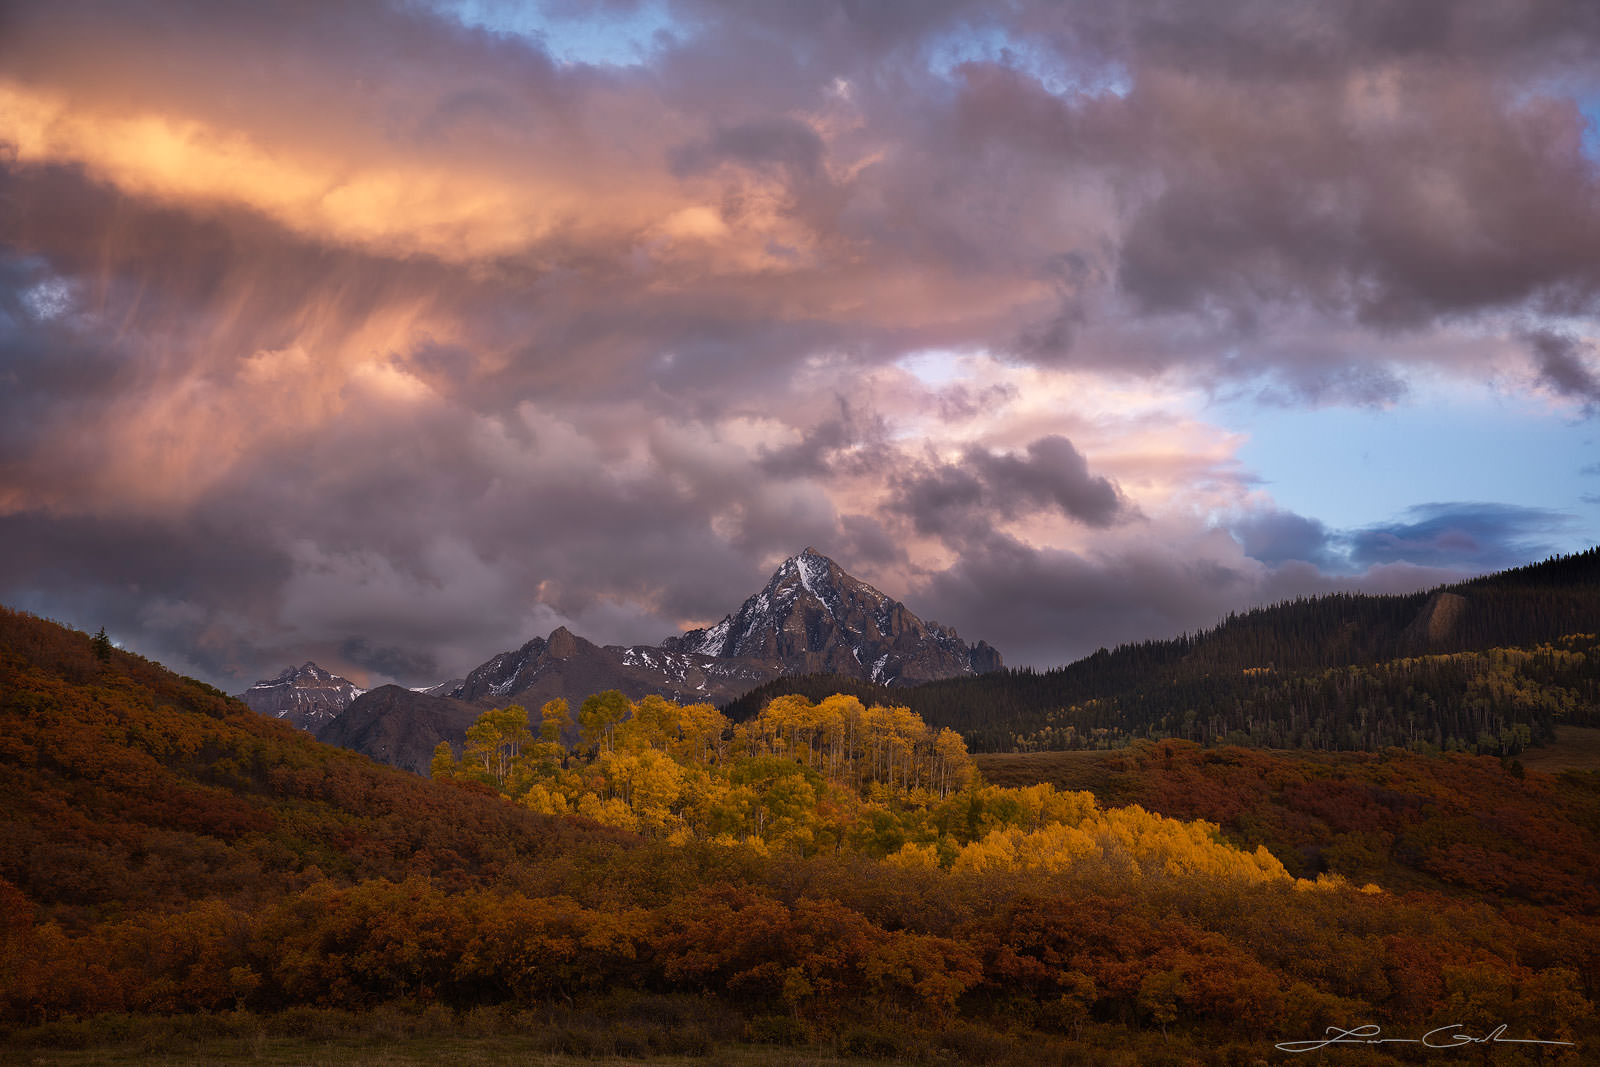 A beautiful mountain sunset in Colorado with orange clouds, Mt Sneffels, yellow aspens, and orange oaks